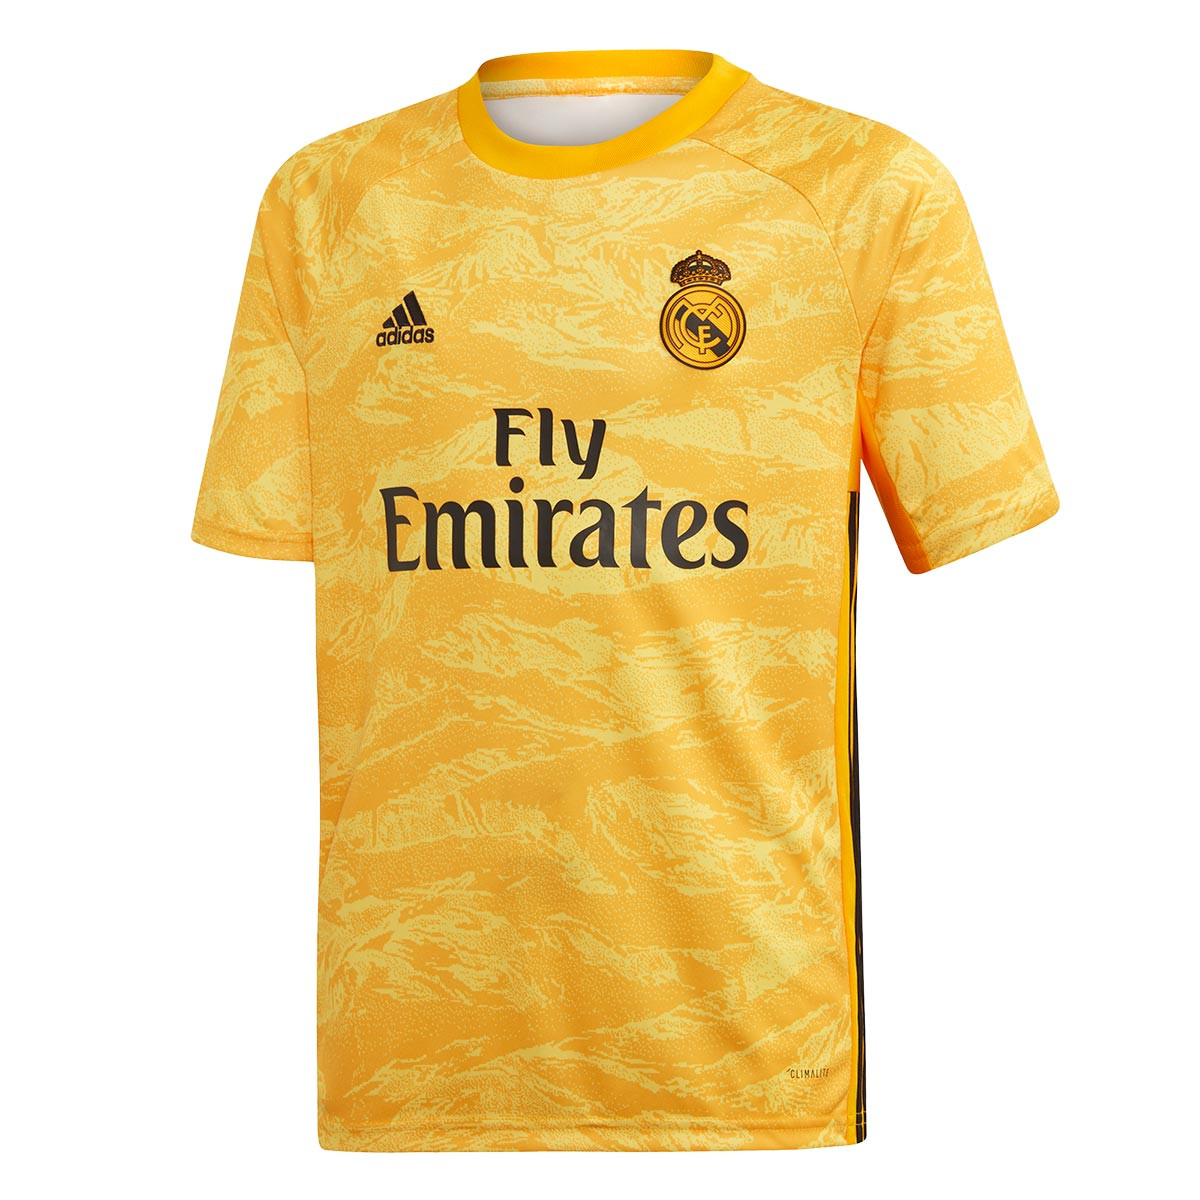 real madrid jersey store near me